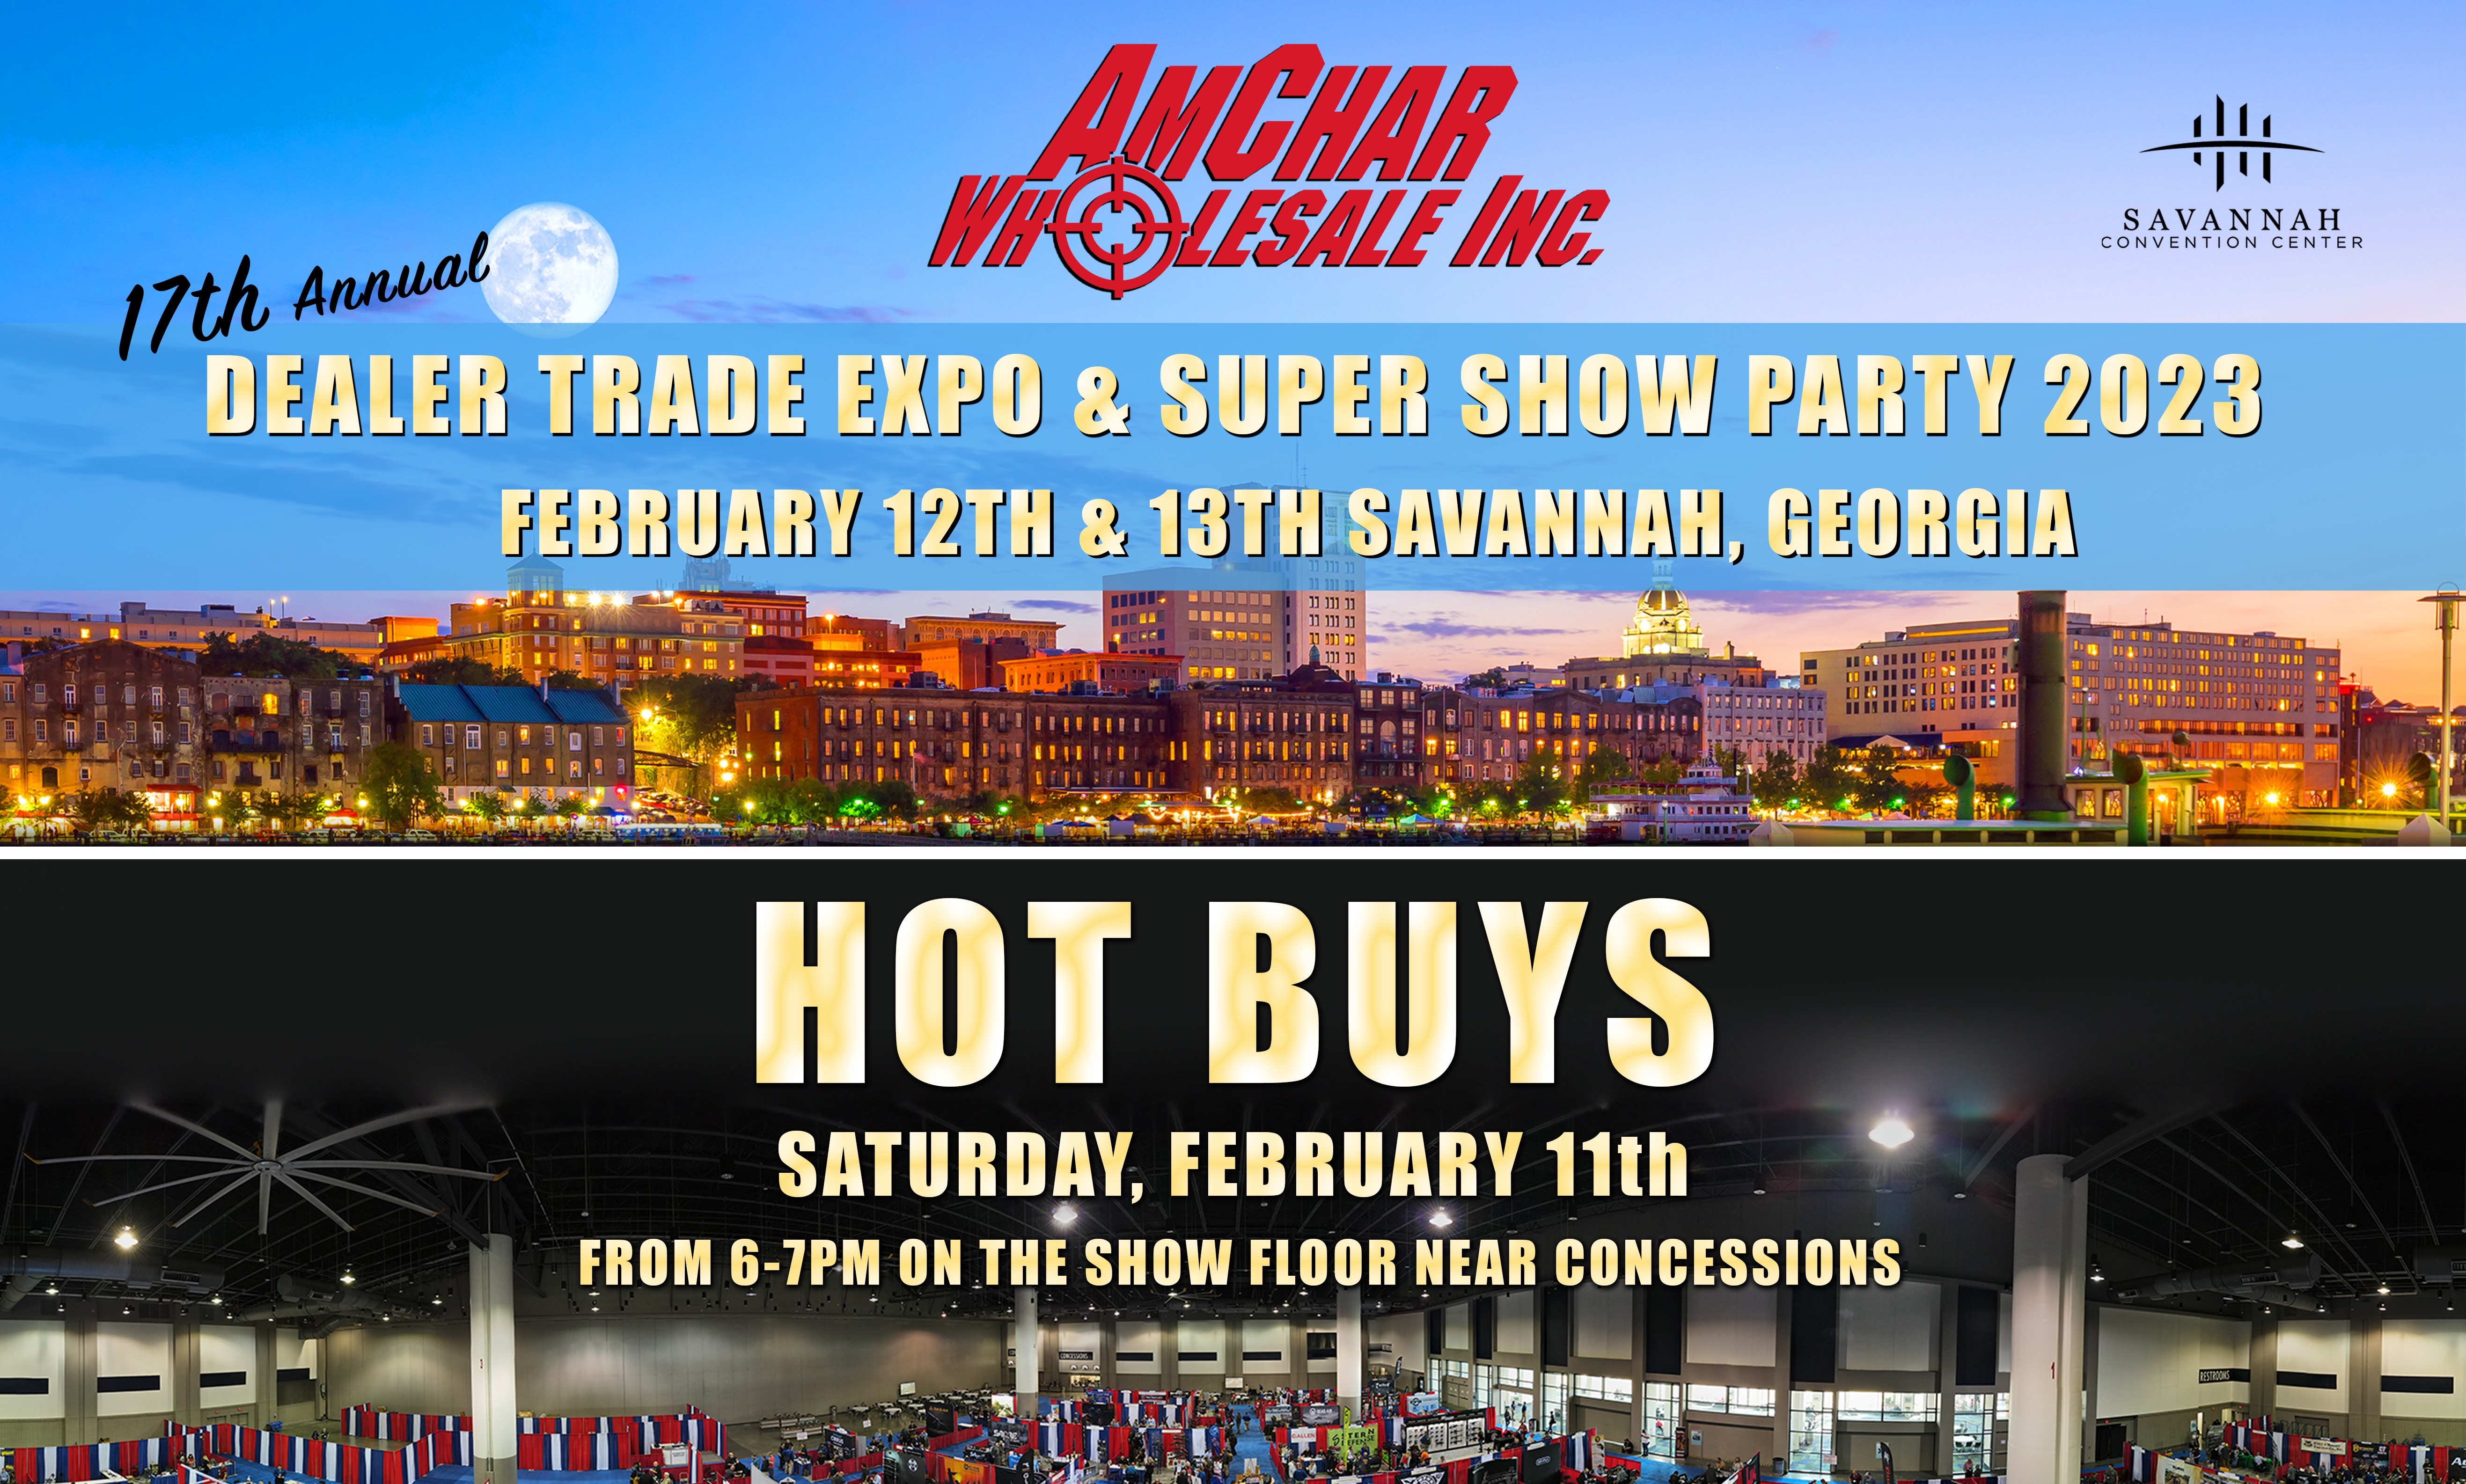 AmChar 17th Annual Dealer Trade Expo & Suprt Show Party 2023